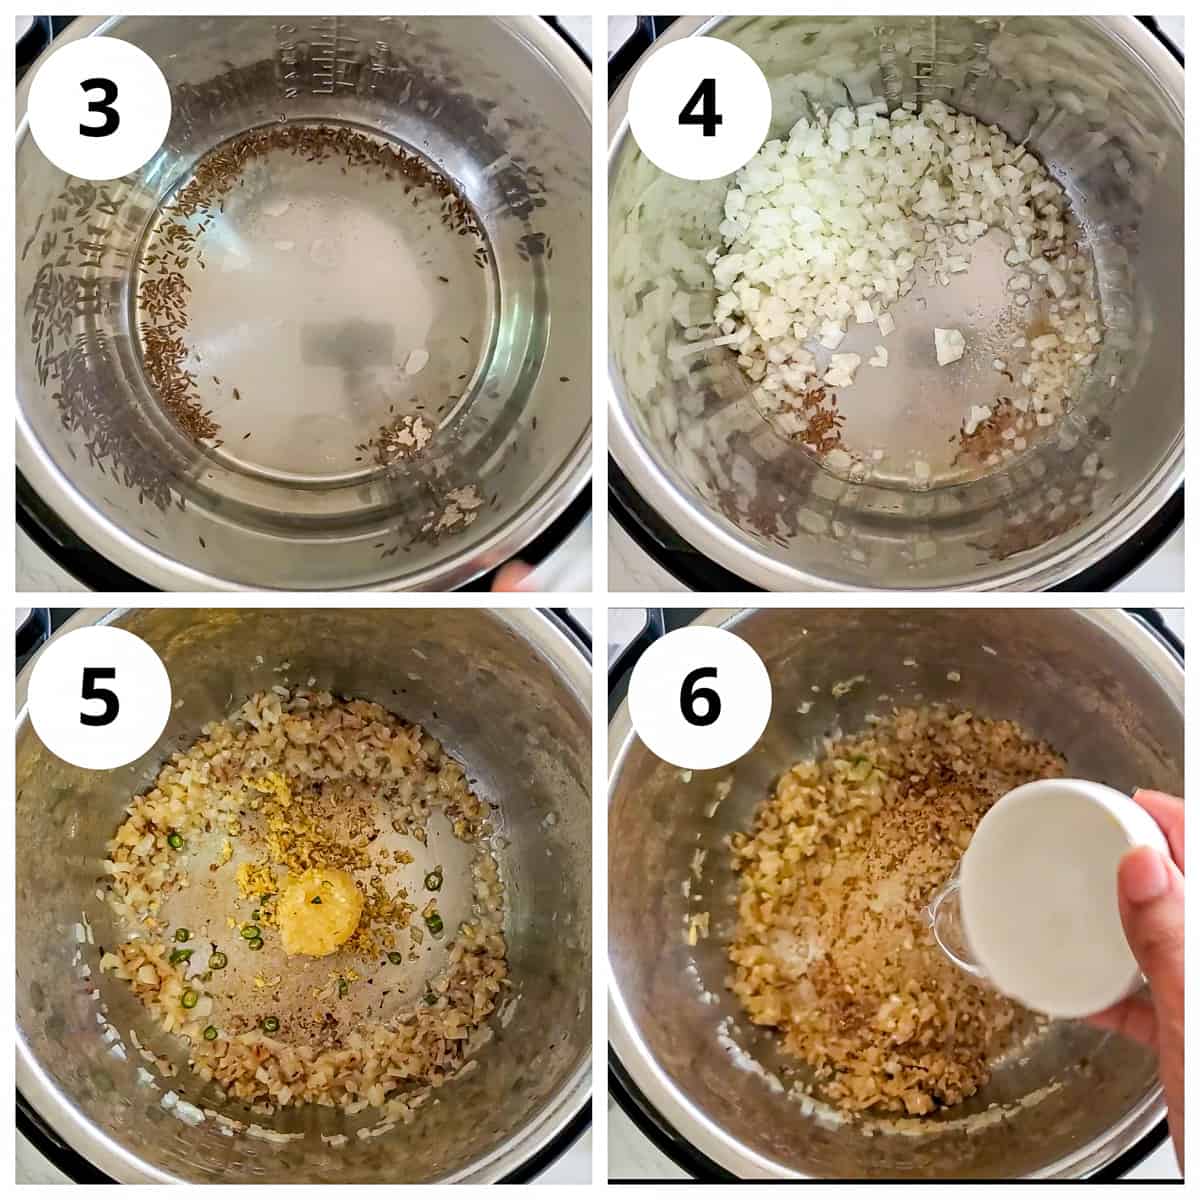 Steps showing sauteing onioon, ginger and garlic for lobia